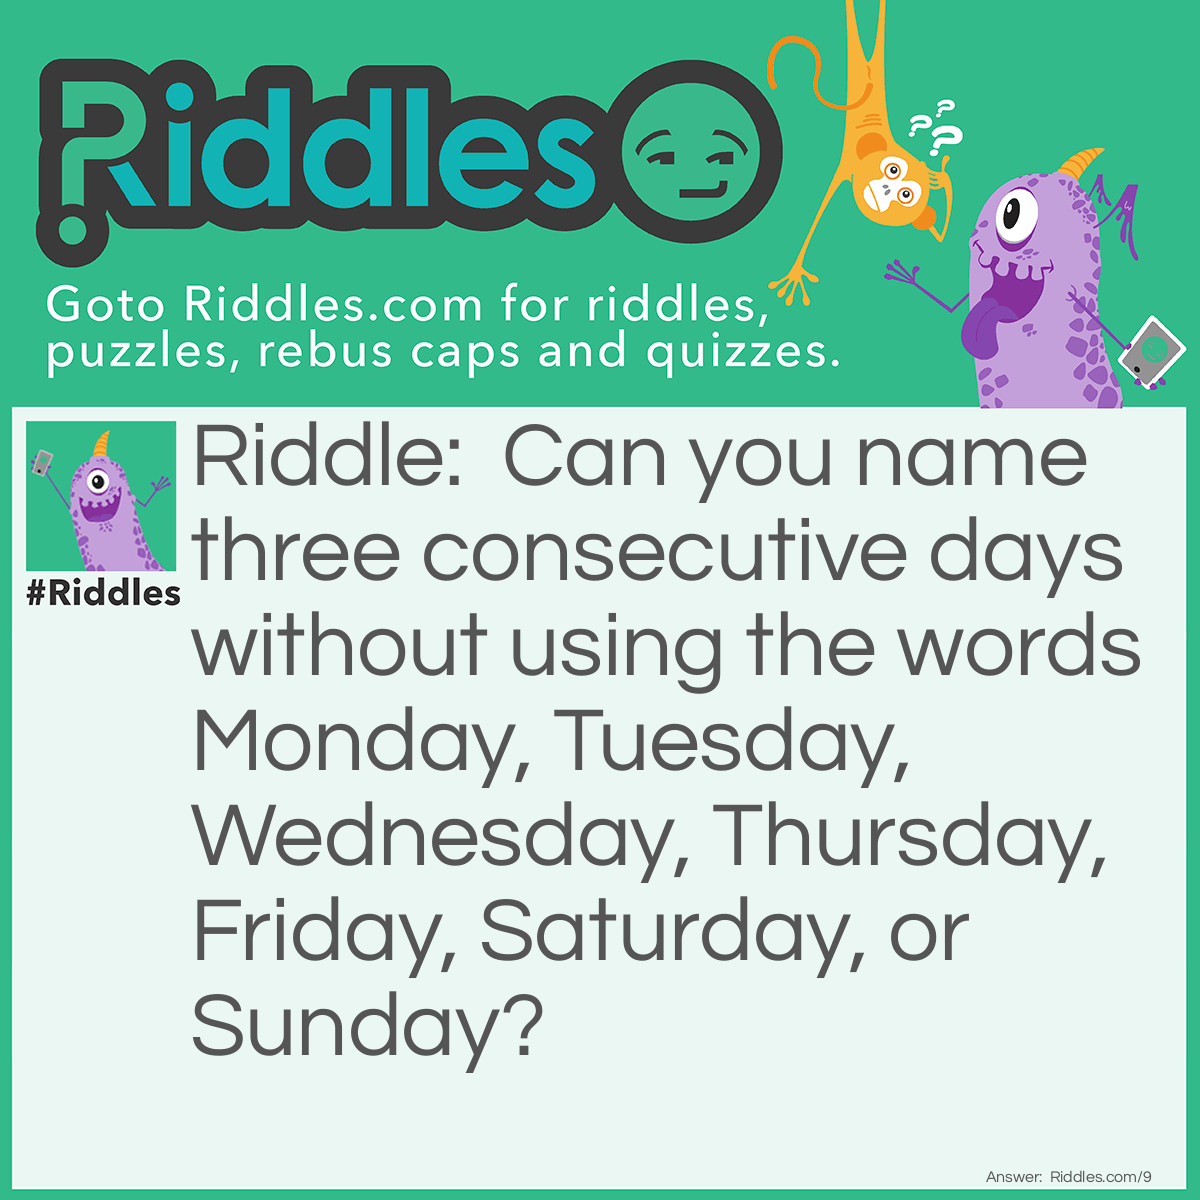 Riddle: Can you name three consecutive days without using the words Monday, Tuesday, Wednesday, Thursday, Friday, Saturday, or Sunday? Answer: Yesterday, Today, and Tomorrow.